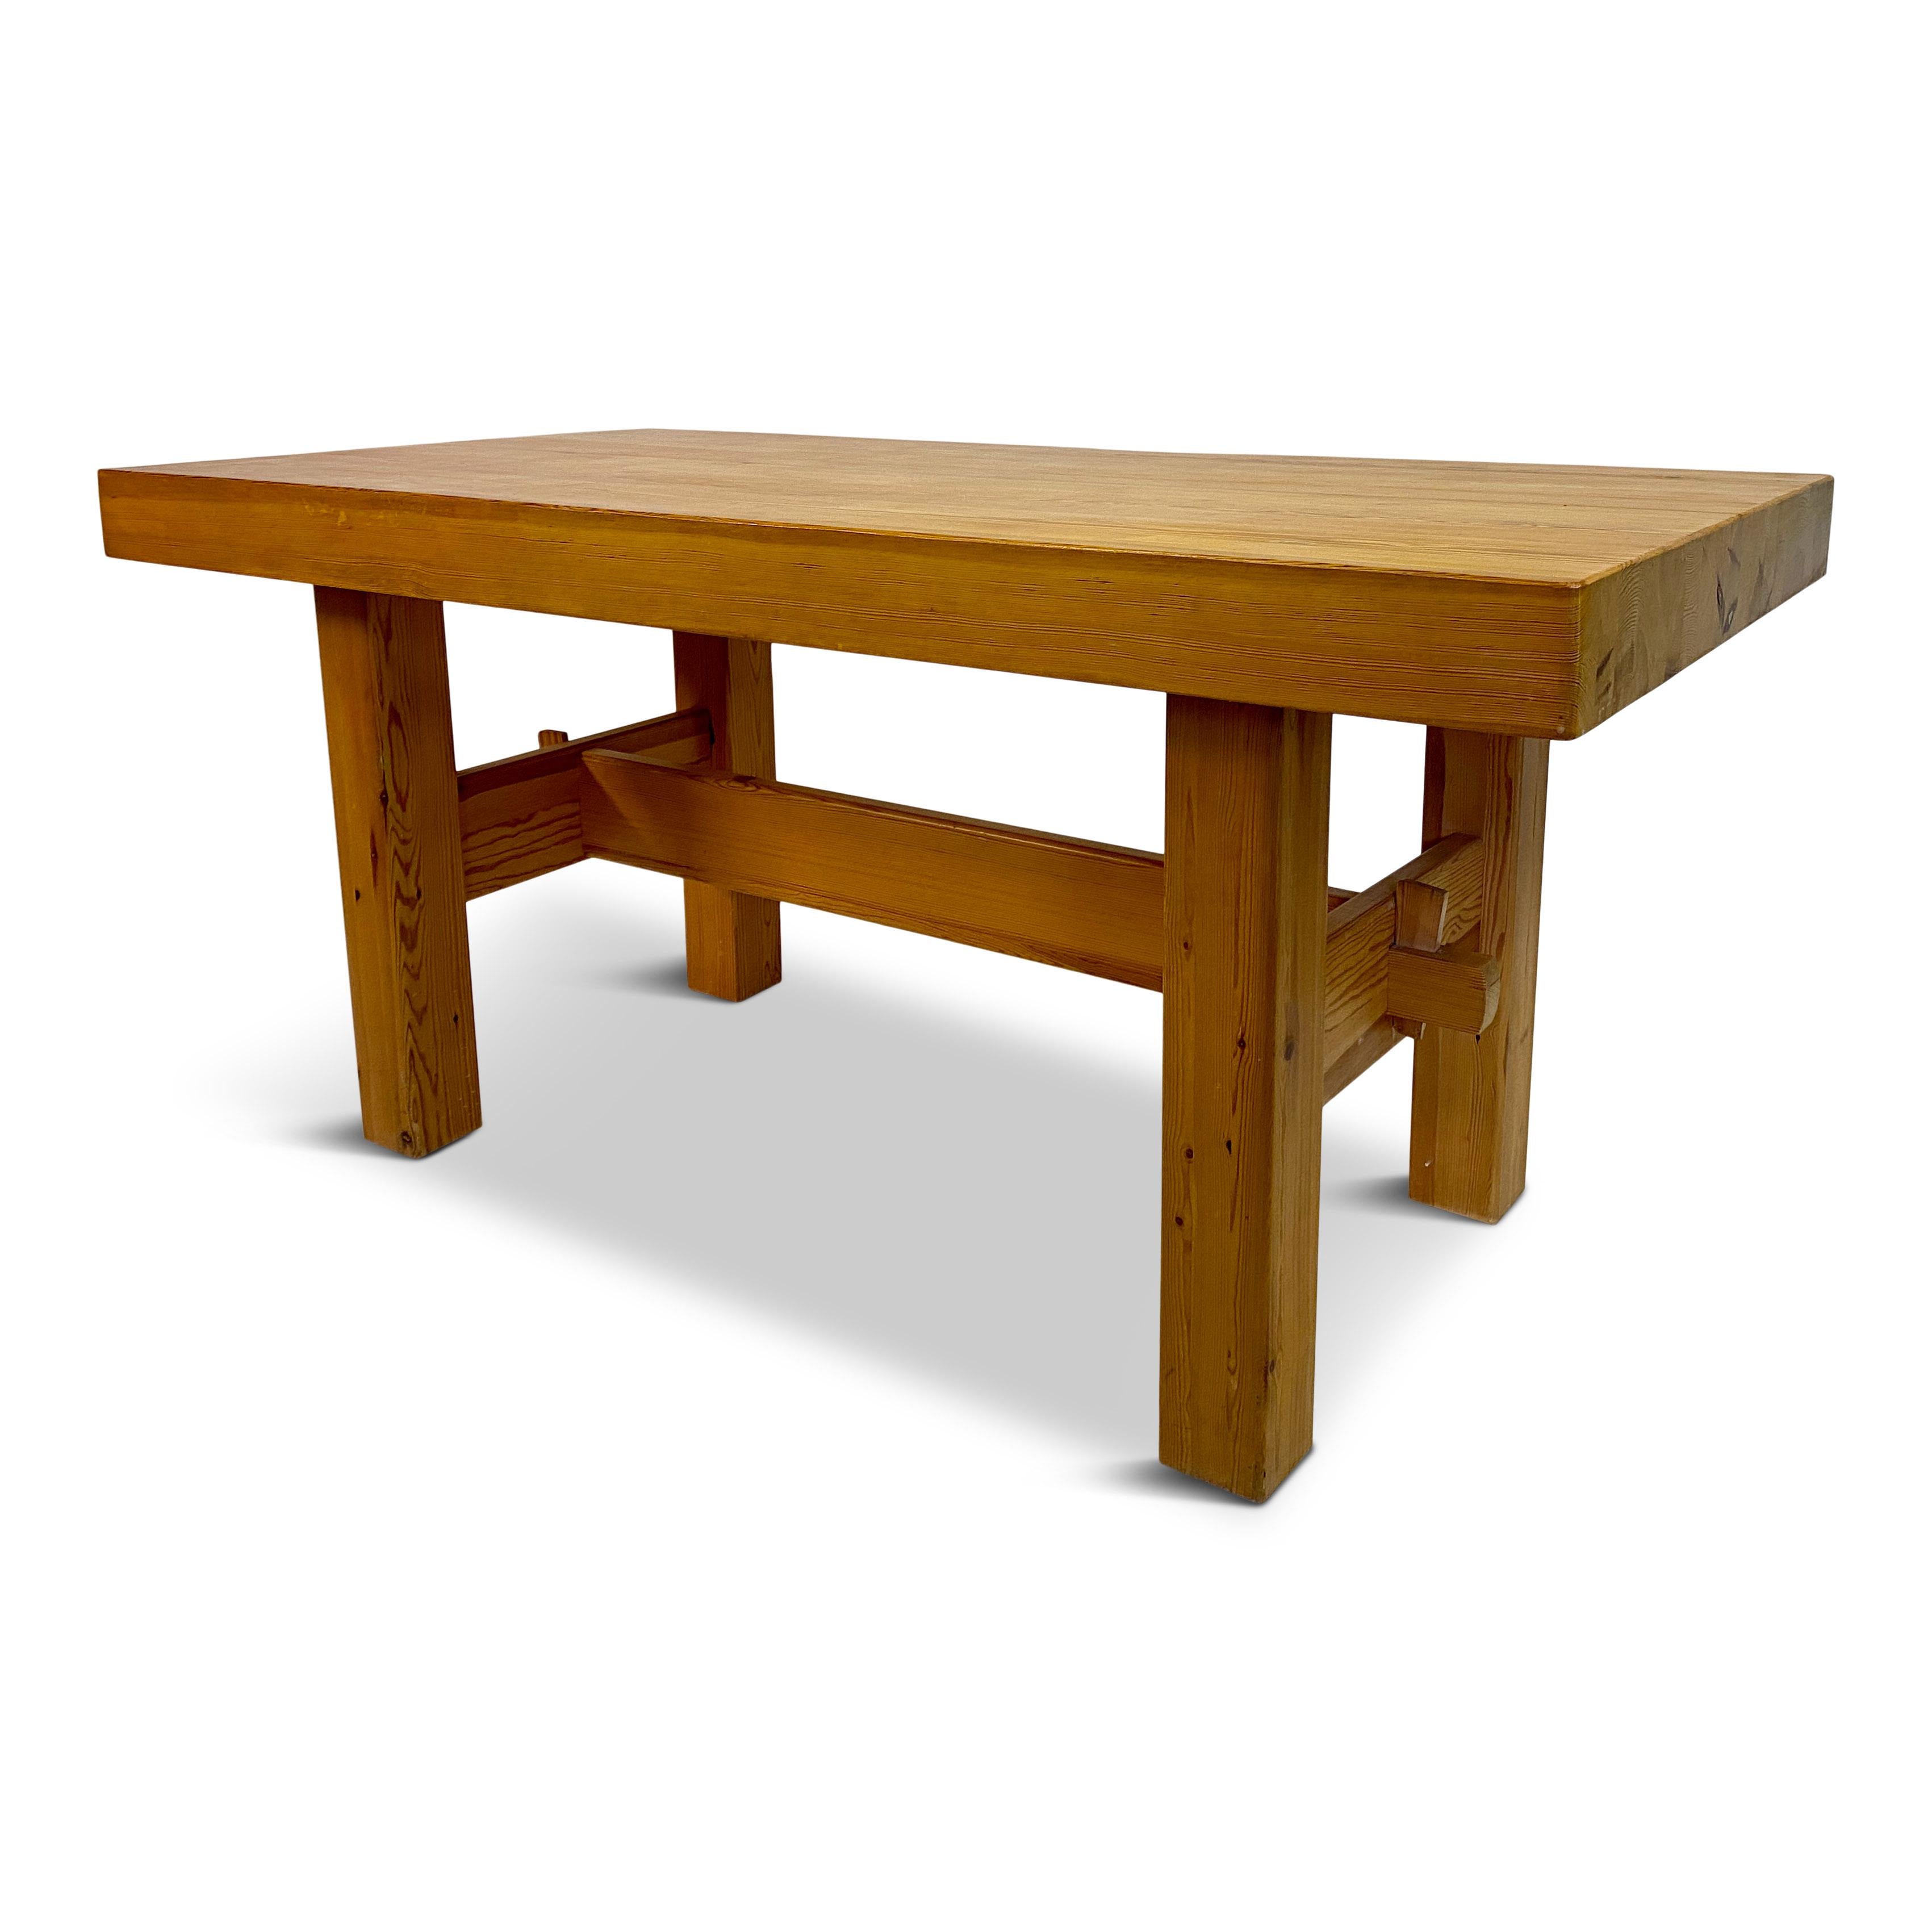 Dining table or desk

Pine

Simple chunky style

Sweden 1970s